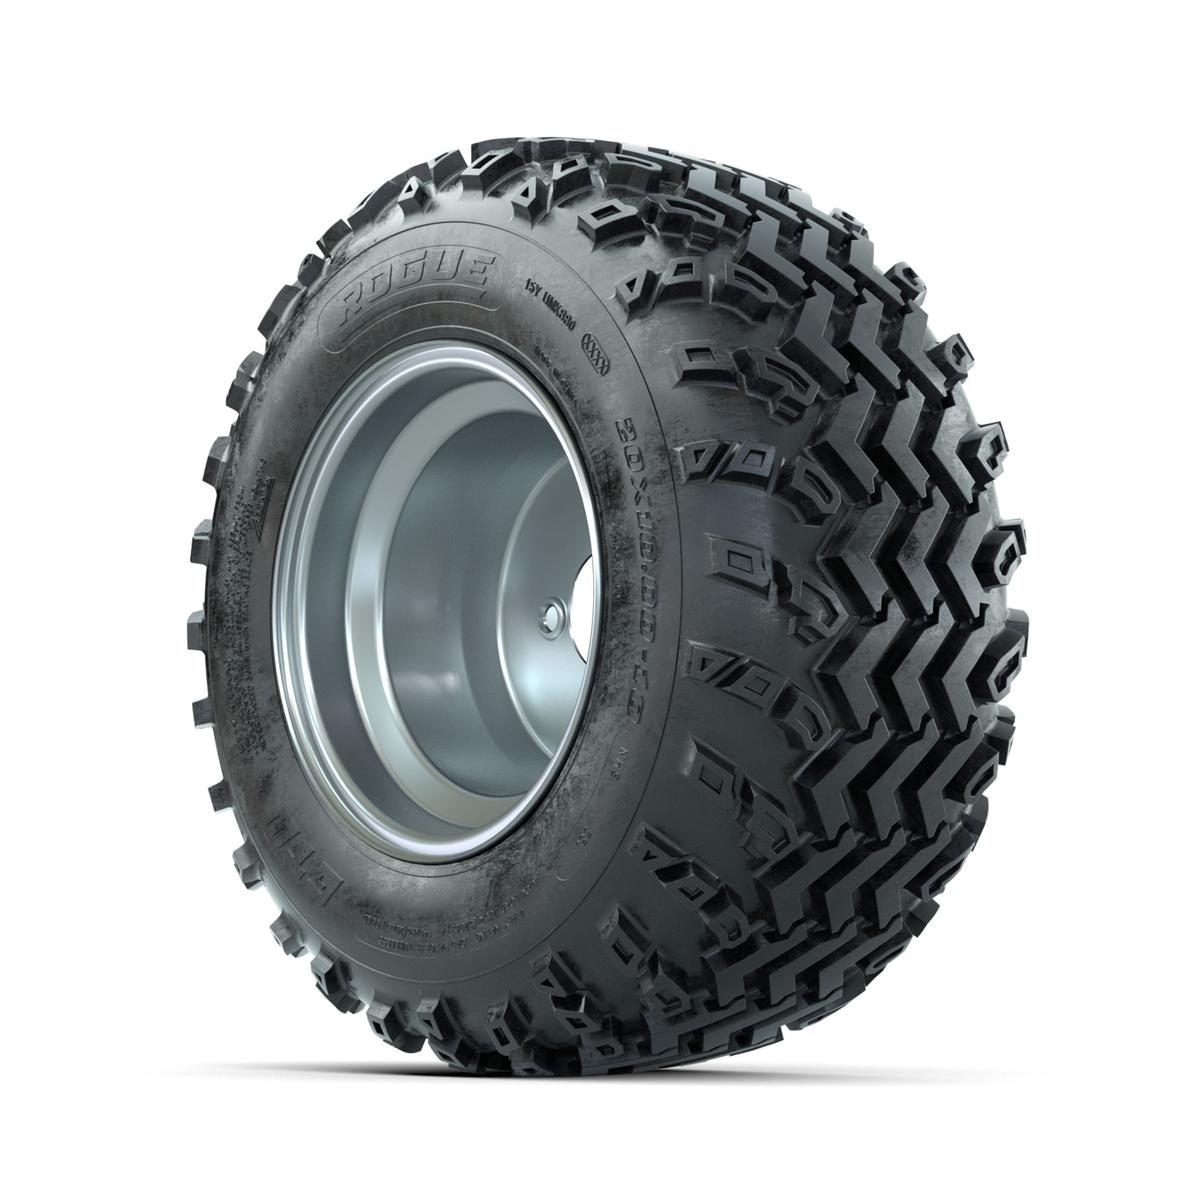 GTW Steel Silver 3:5 Offset 10 in Wheels with 20x10.00-10 Rogue All Terrain Tires – Full Set